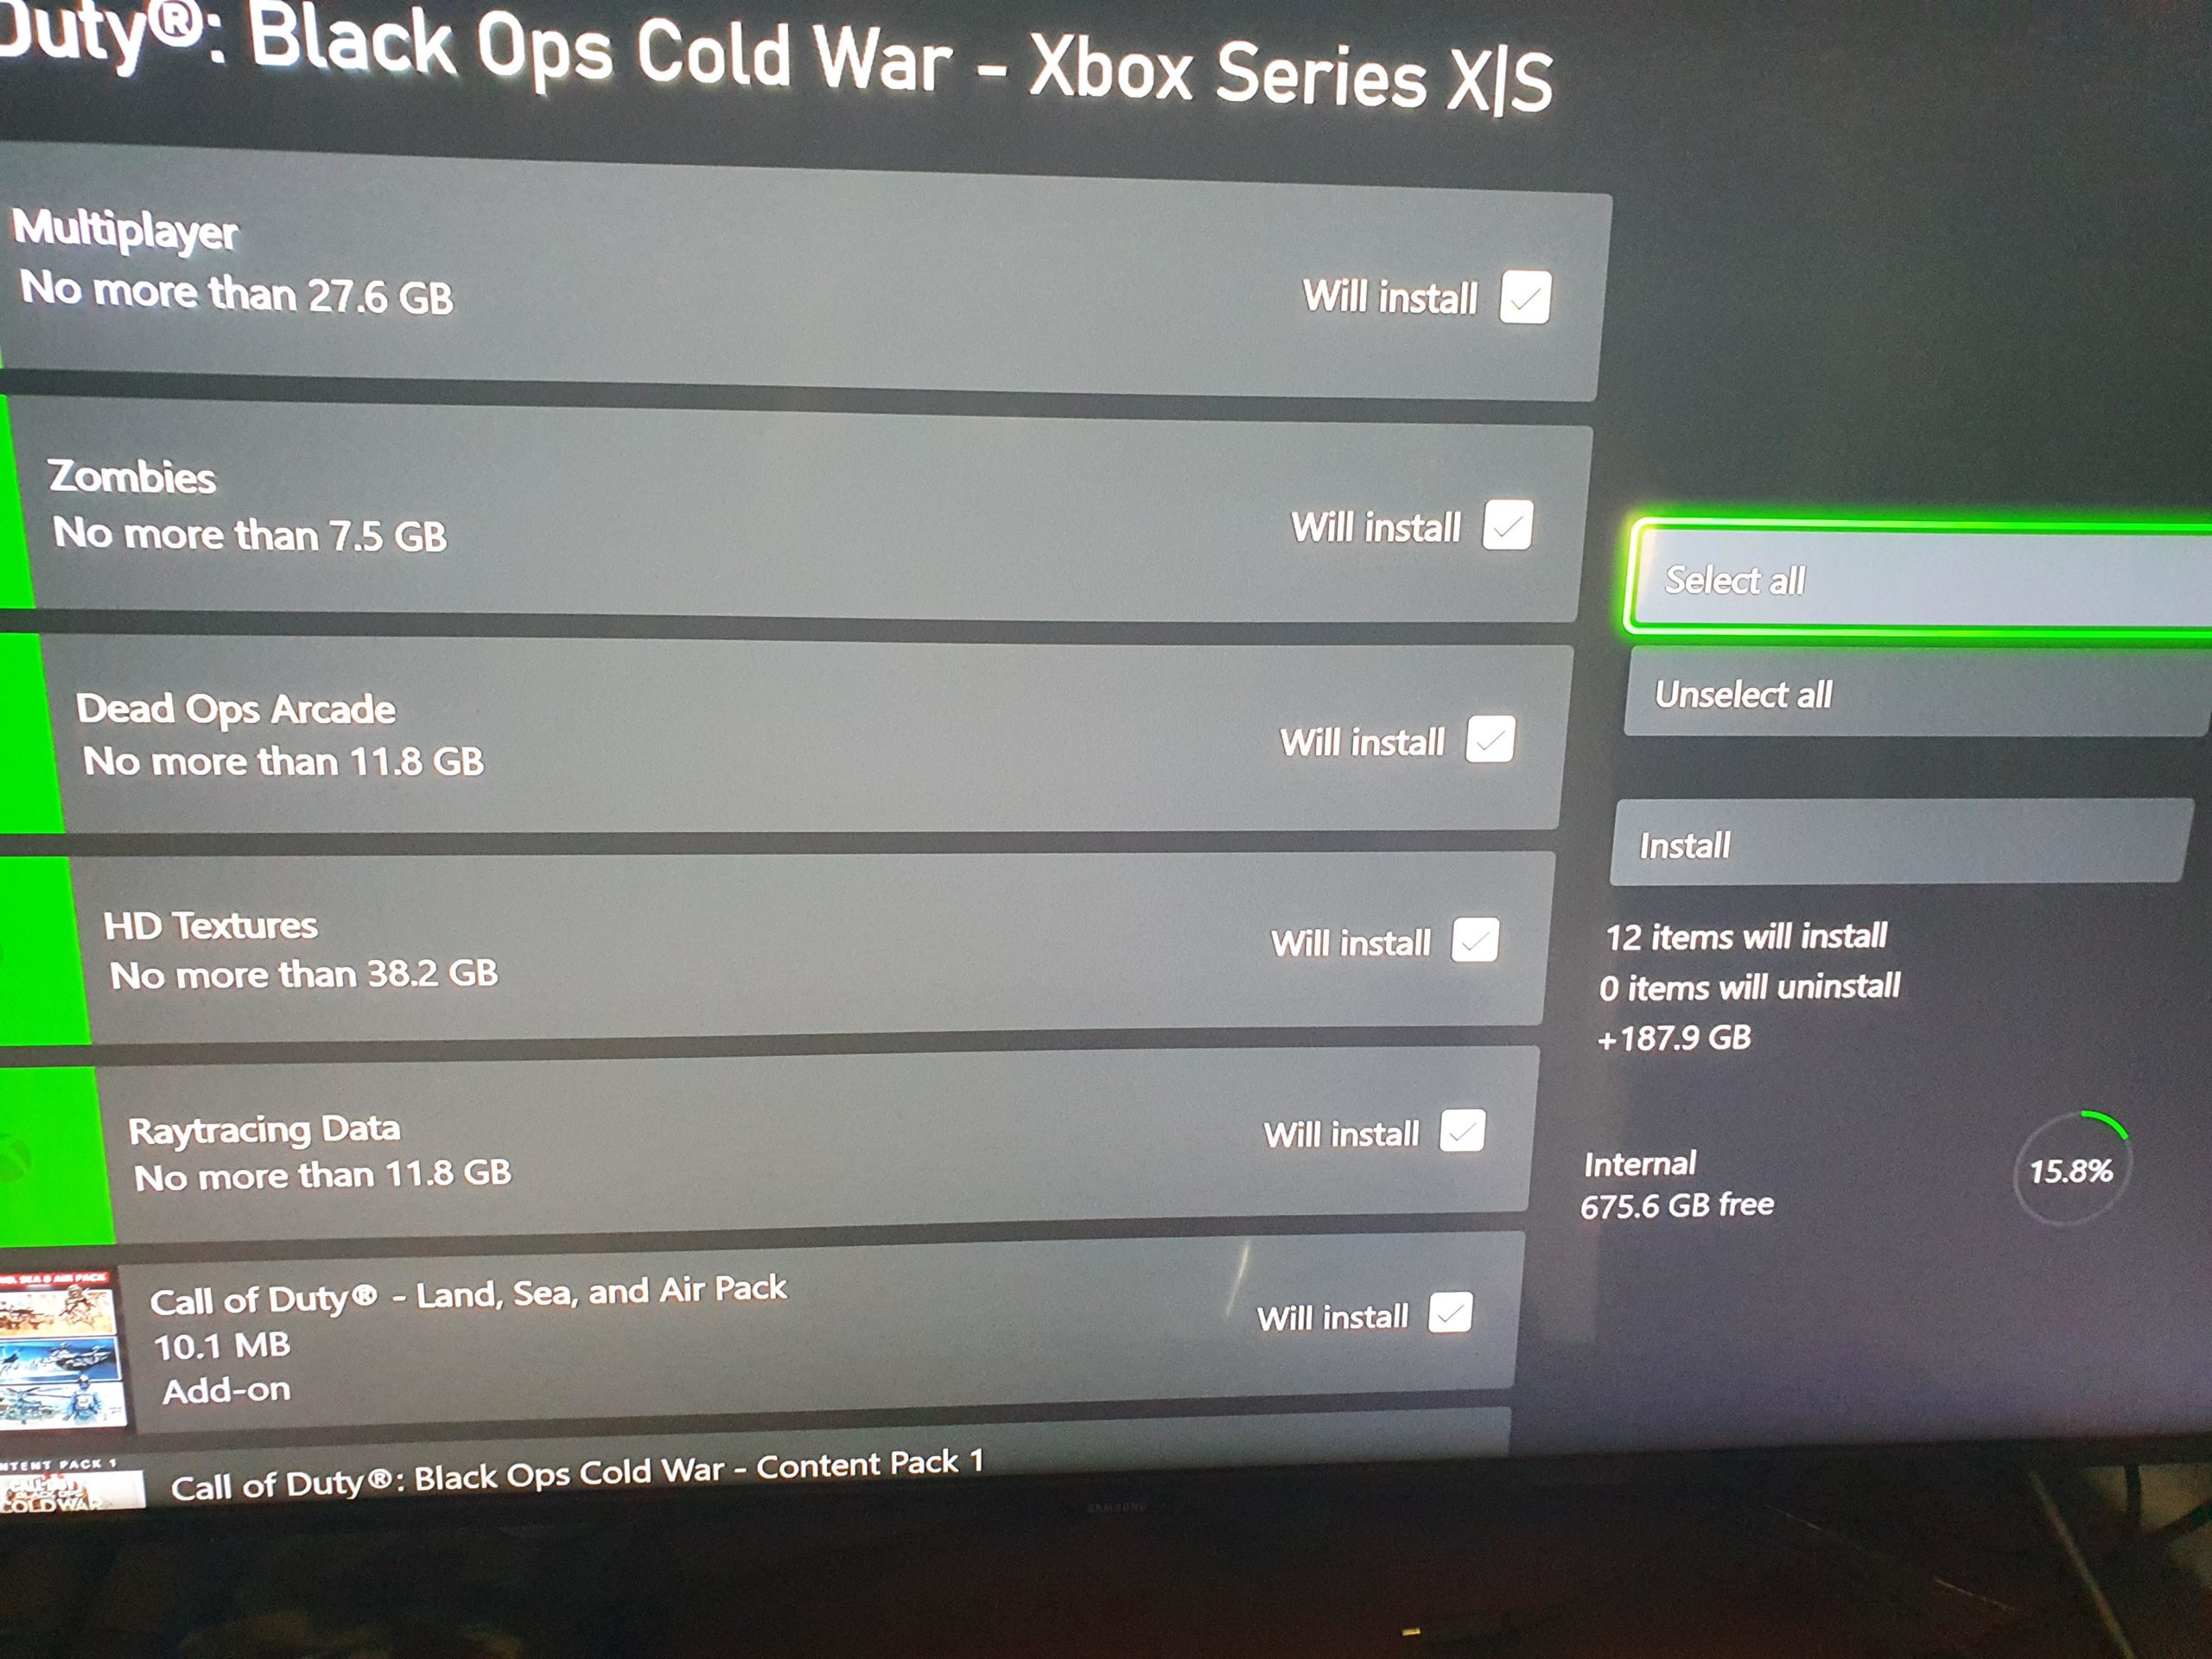 call of duty cold war for xbox